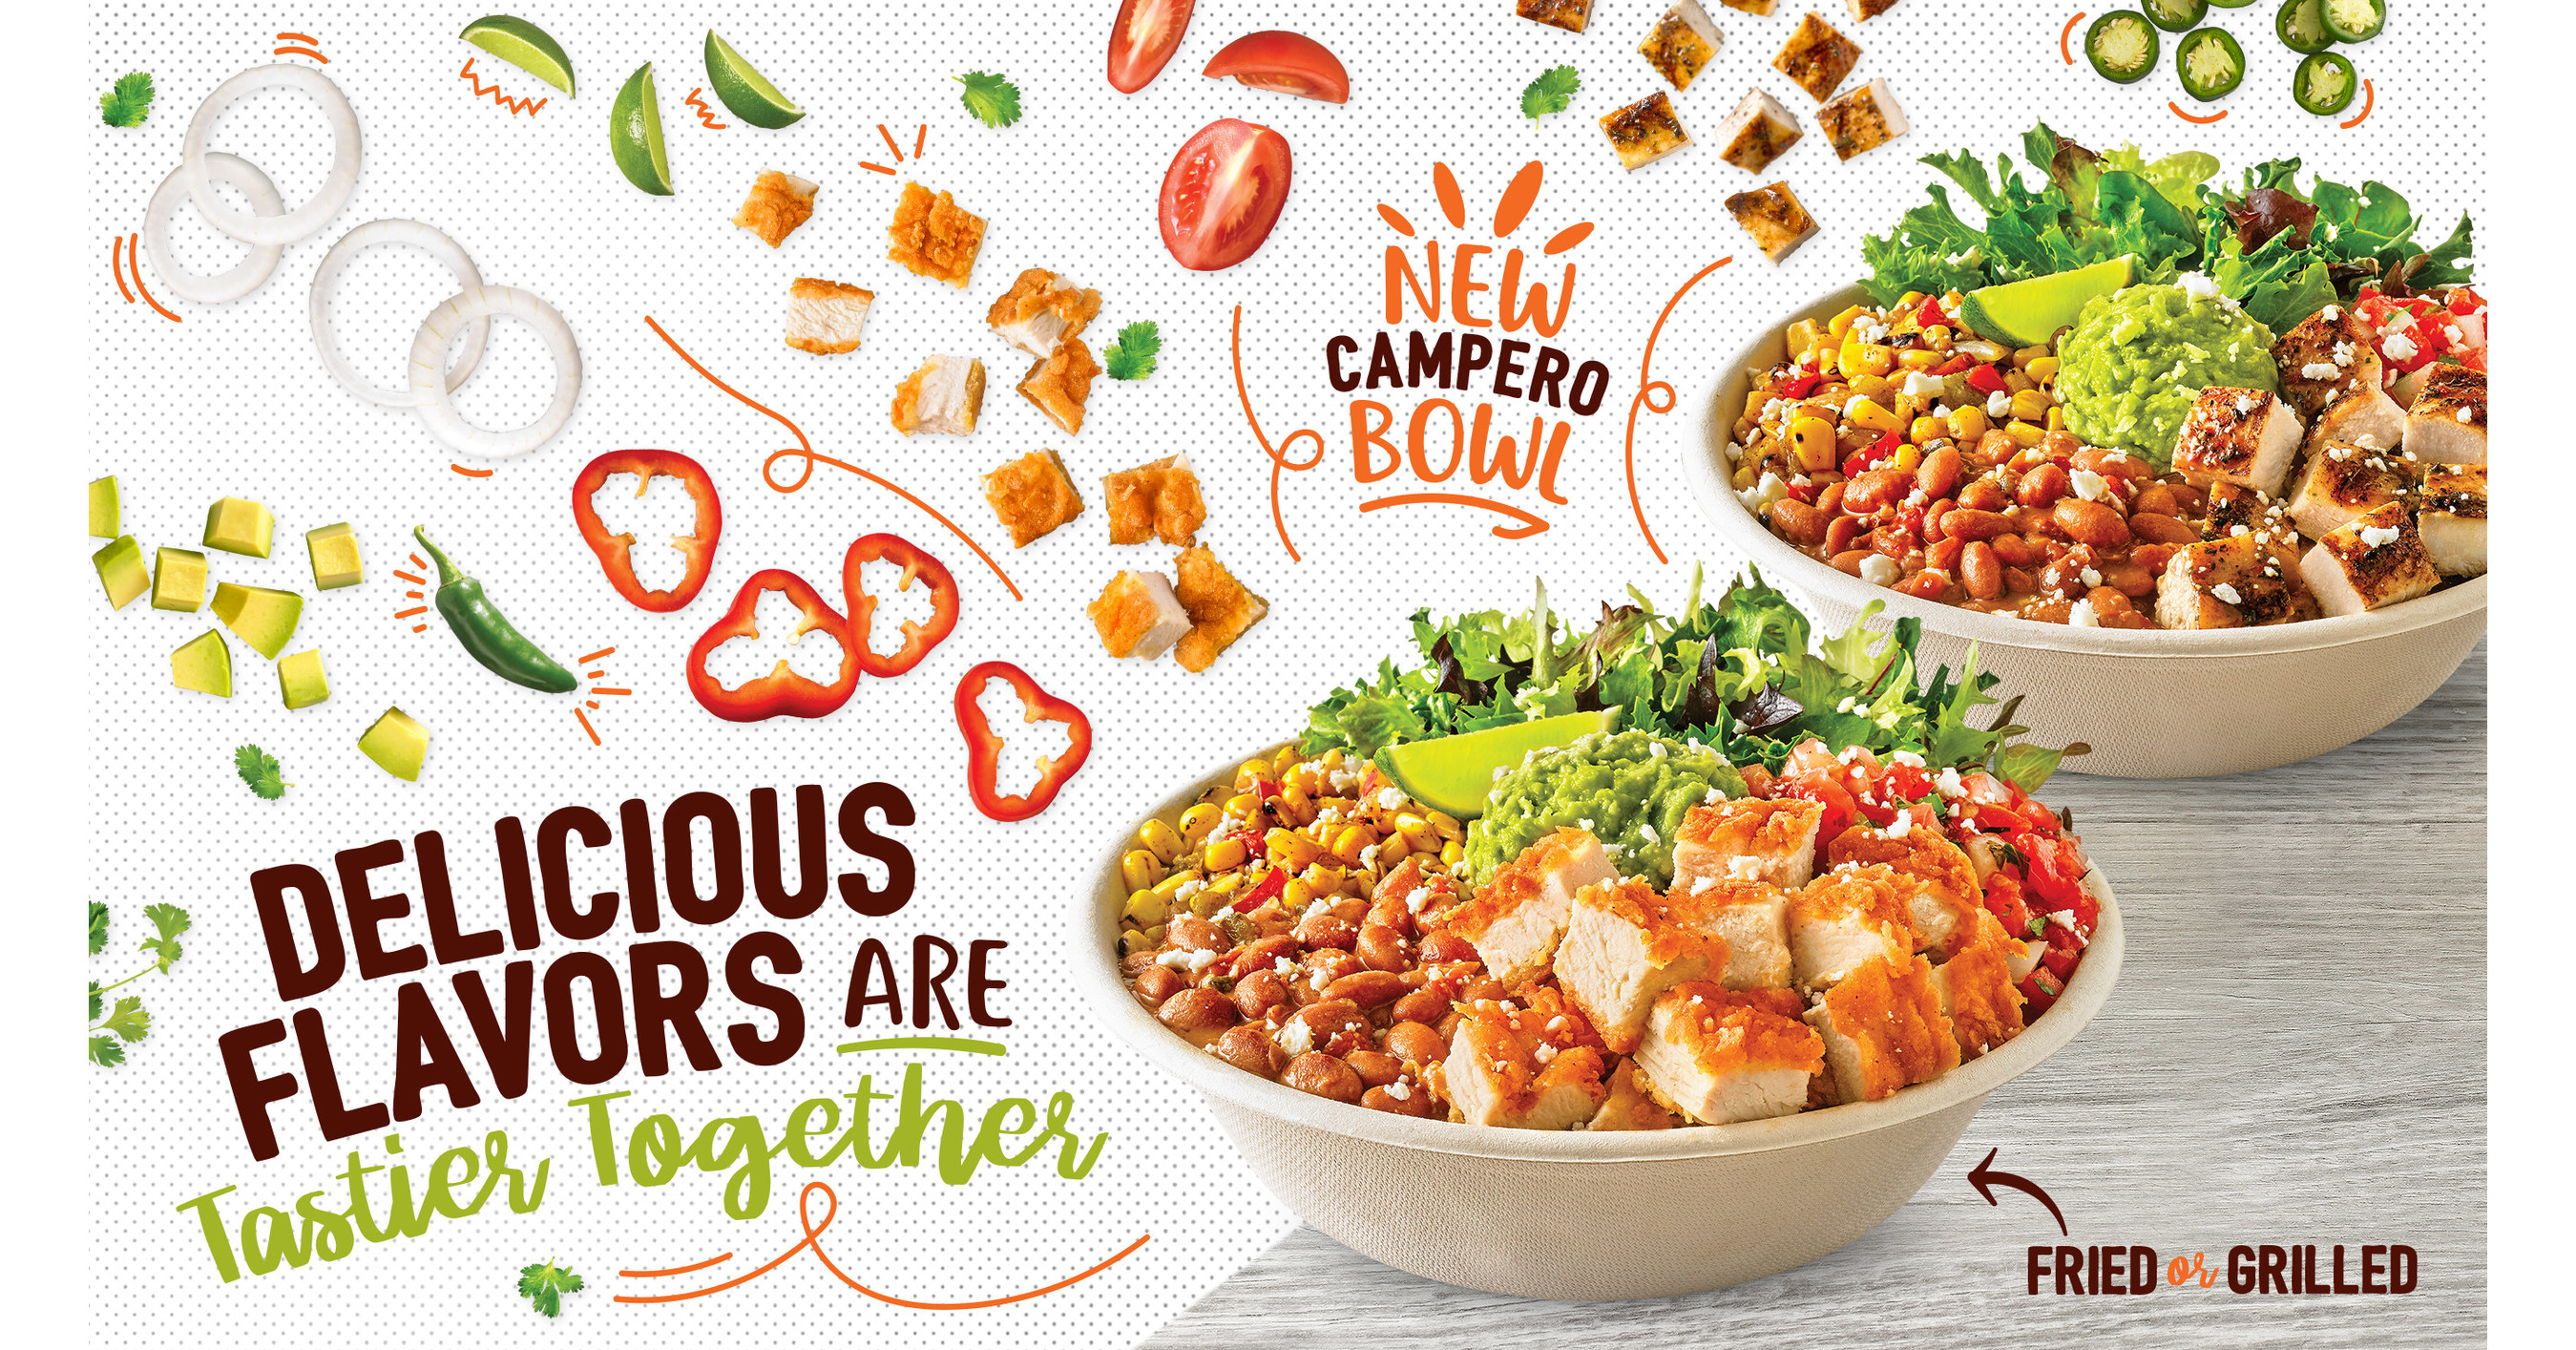 Pollo Campero Brings Delicious Flavors Together In The New Campero Bowl